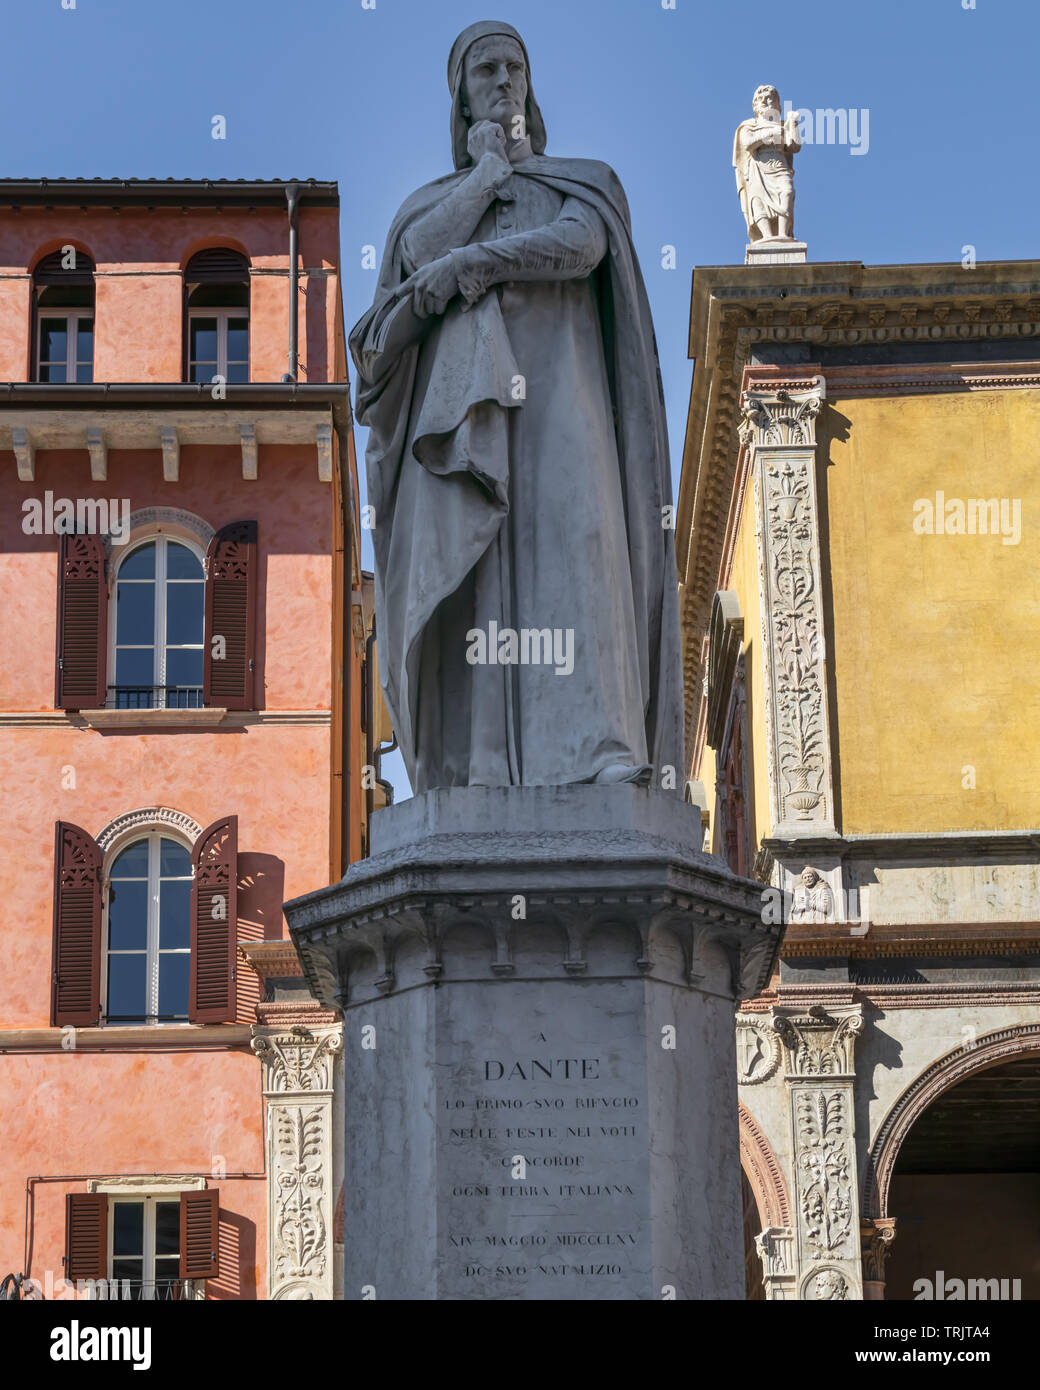 The Statue of Dante Alighieri in a square in Verona sandwiched between two buildings on a bright summer day in the sun Stock Photo